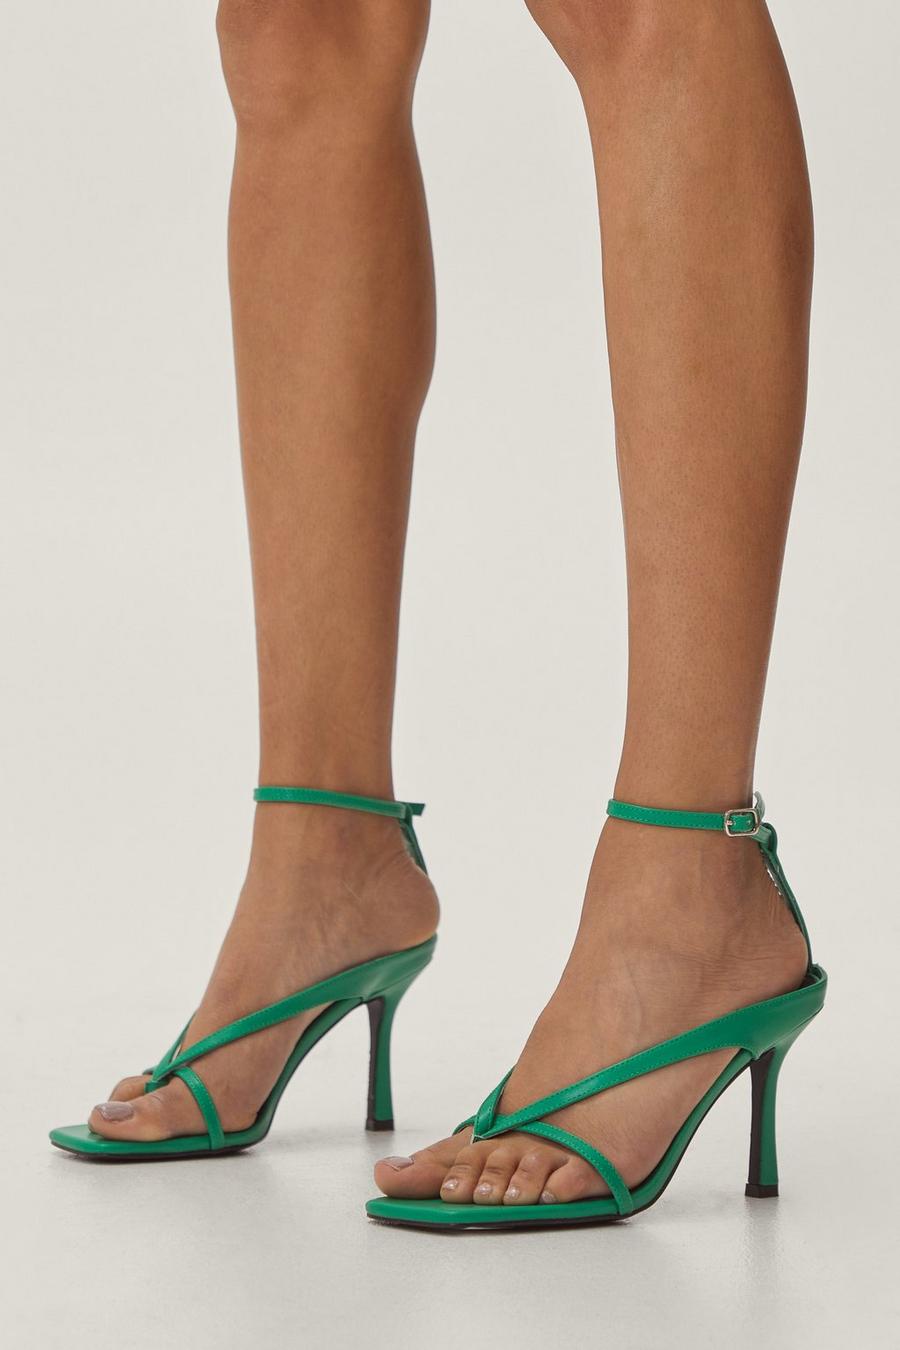 Strappy Stiletto Faux Leather Heels